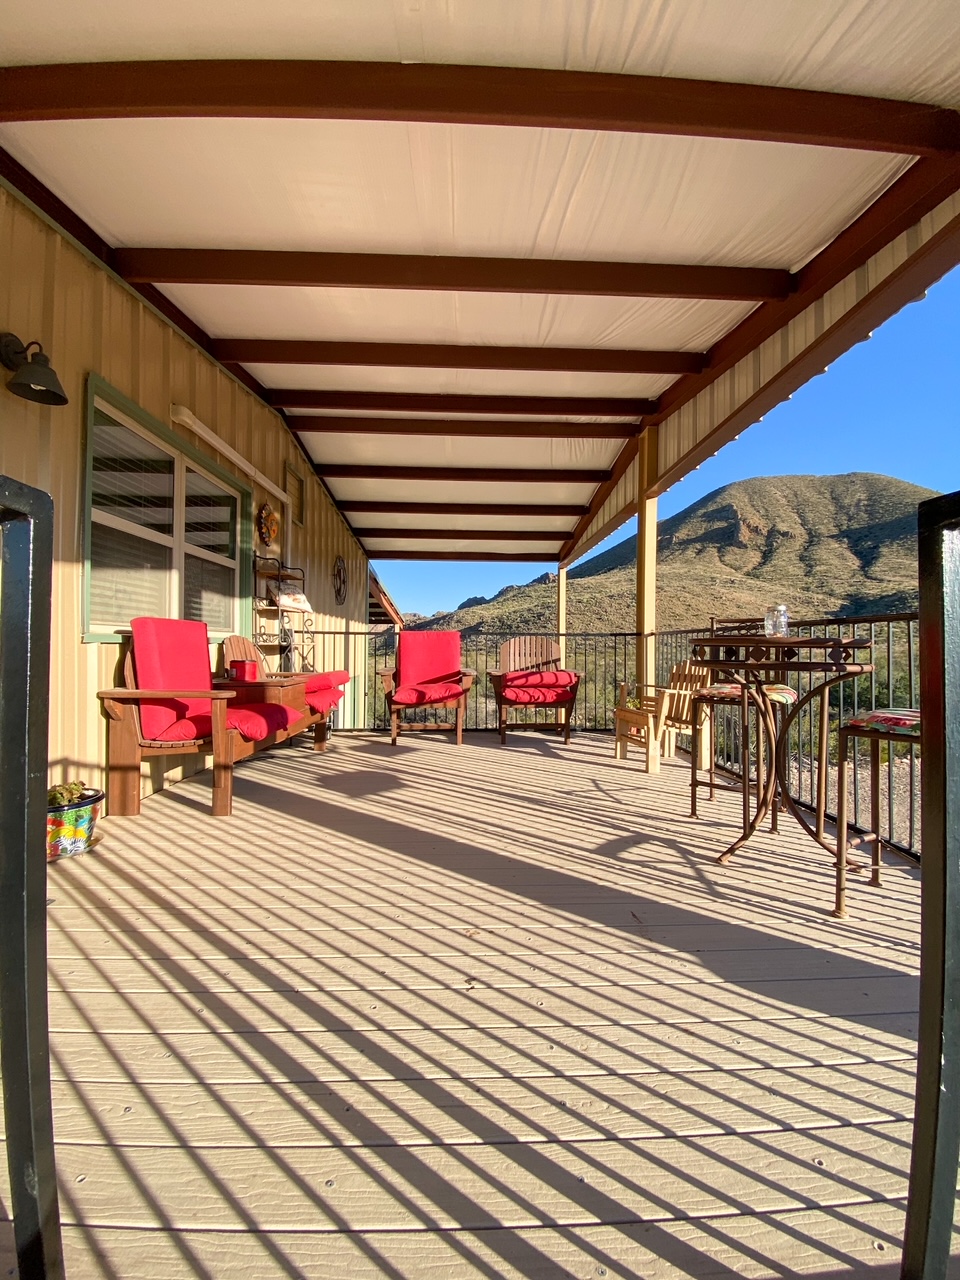 the deck of our Airbnb in Terlingua, Texas